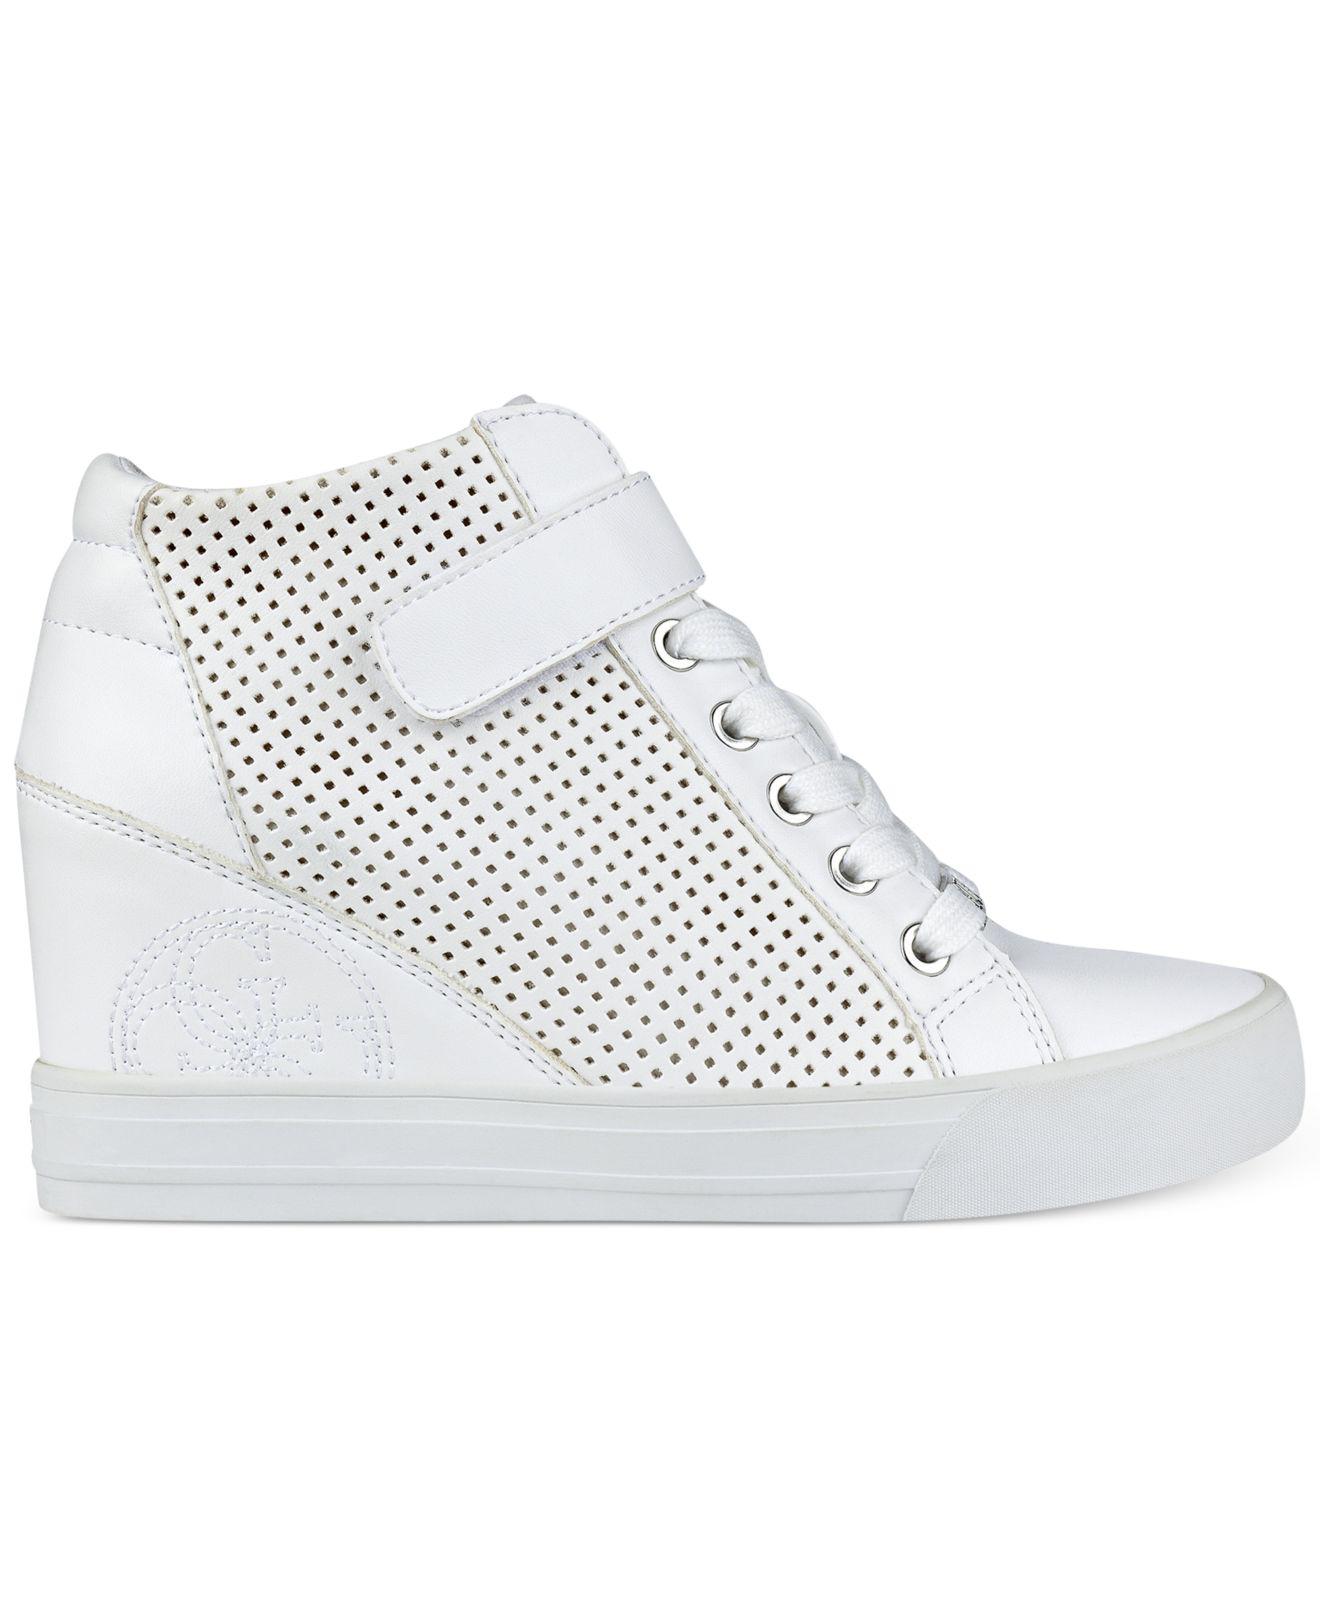 Guess White Wedge Sneakers Deals, SAVE 34% - kokteiliai.net